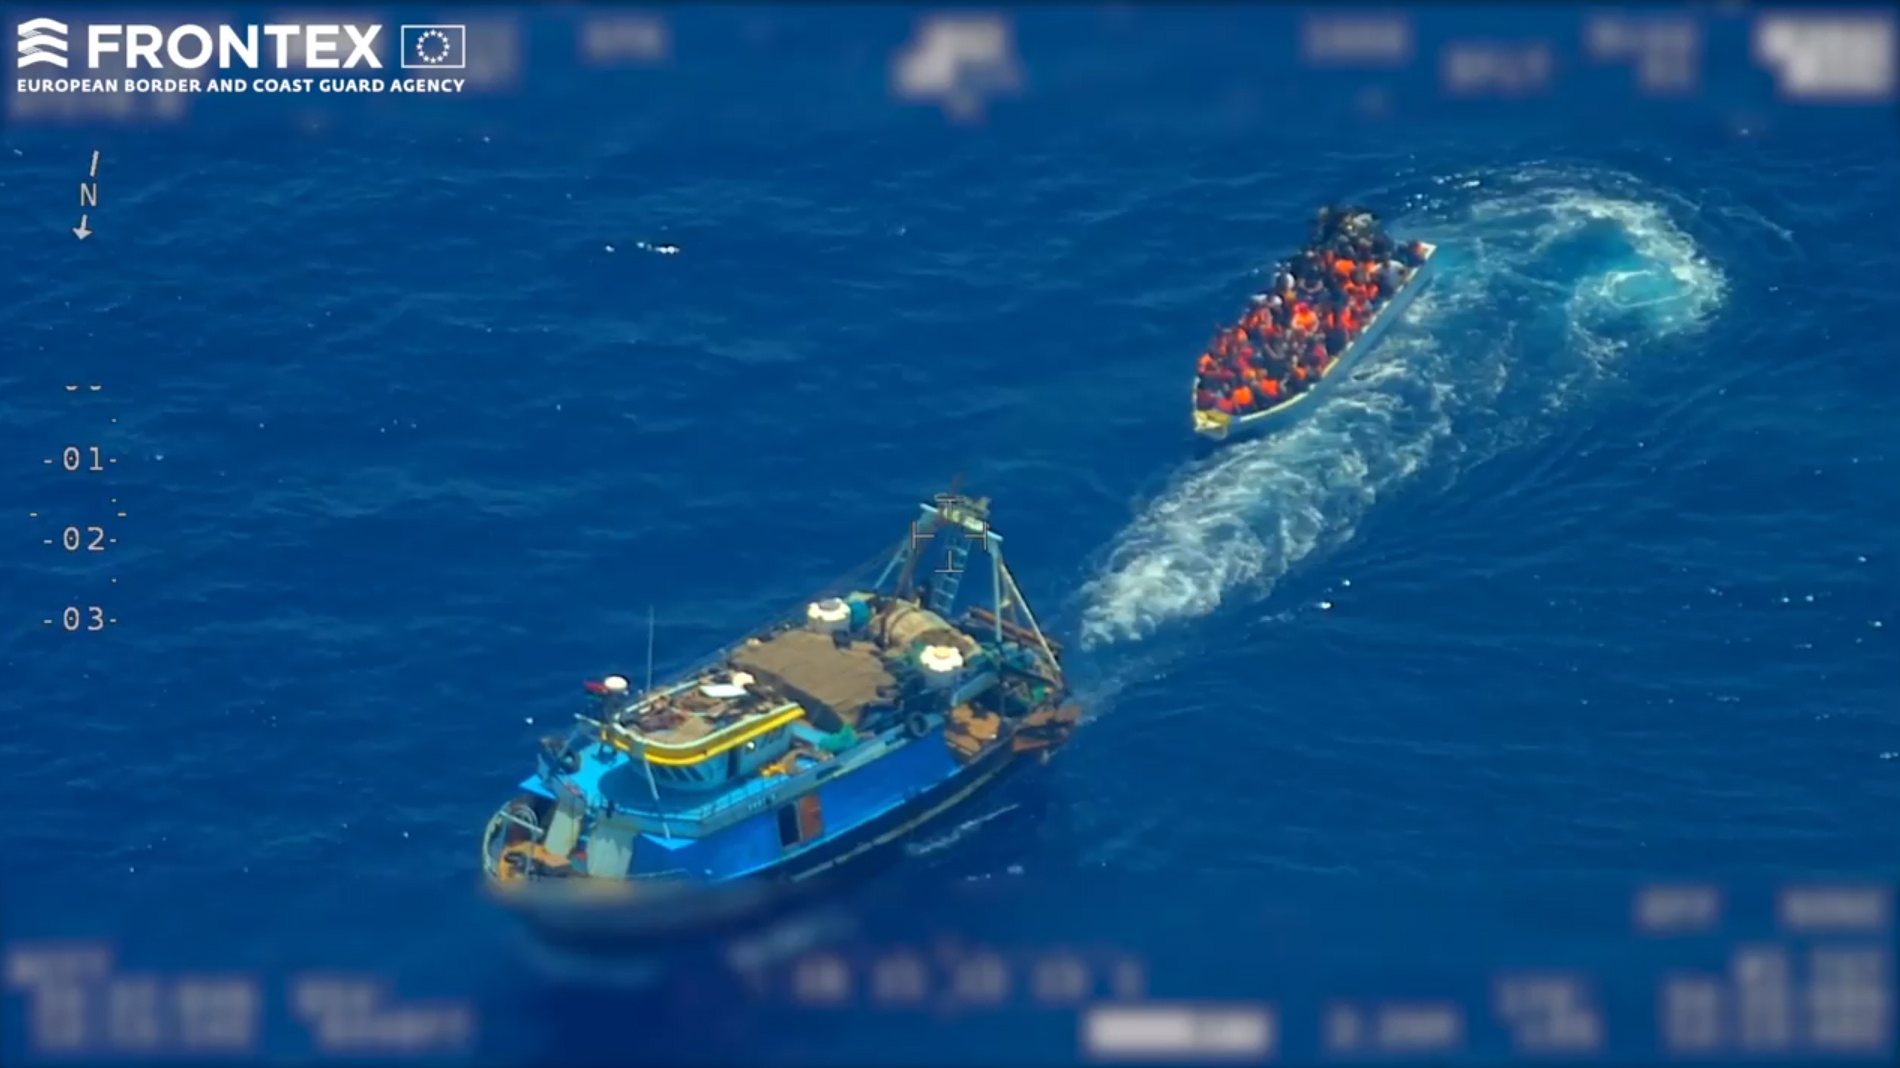 epa07669907 A screen grab taken from an undated handout video made available by the European Border and Coast Guard Agency (Frontex) on 22 June 2019 shows a fishing trawler (L) pulling away from a wooden boat with migrants on board, at high seas in the Mediterranean. According to Frontex, some 80 people emerged from below the deck of the fishing trawler -- a so-called &#039;mother boat&#039; that people smugglers use to carry large groups of migrants across the sea -- and got into the smaller boat. After the migrant boat was filled with people it slowly headed toward the Italian island of Lampedusa as the fishing trawler quickly moved away. Frontex said that it used a plane and a drone to observe the fishing trawler and the boat with migrants for several hours; it also alerted Italian and Maltese authorities and the EUNAVFOR Med (Operation Sophia). Italian authorities, who are investigating the case, started a complex operation that caught up with the bigger vessel and arrested the suspected people smugglers and the migrant boat was intercepted in the Italian waters.  EPA/FRONTEX, THE EUROPEAN BORDER AND COAST GUARD AGENCY HANDOUT  HANDOUT EDITORIAL USE ONLY/NO SALES